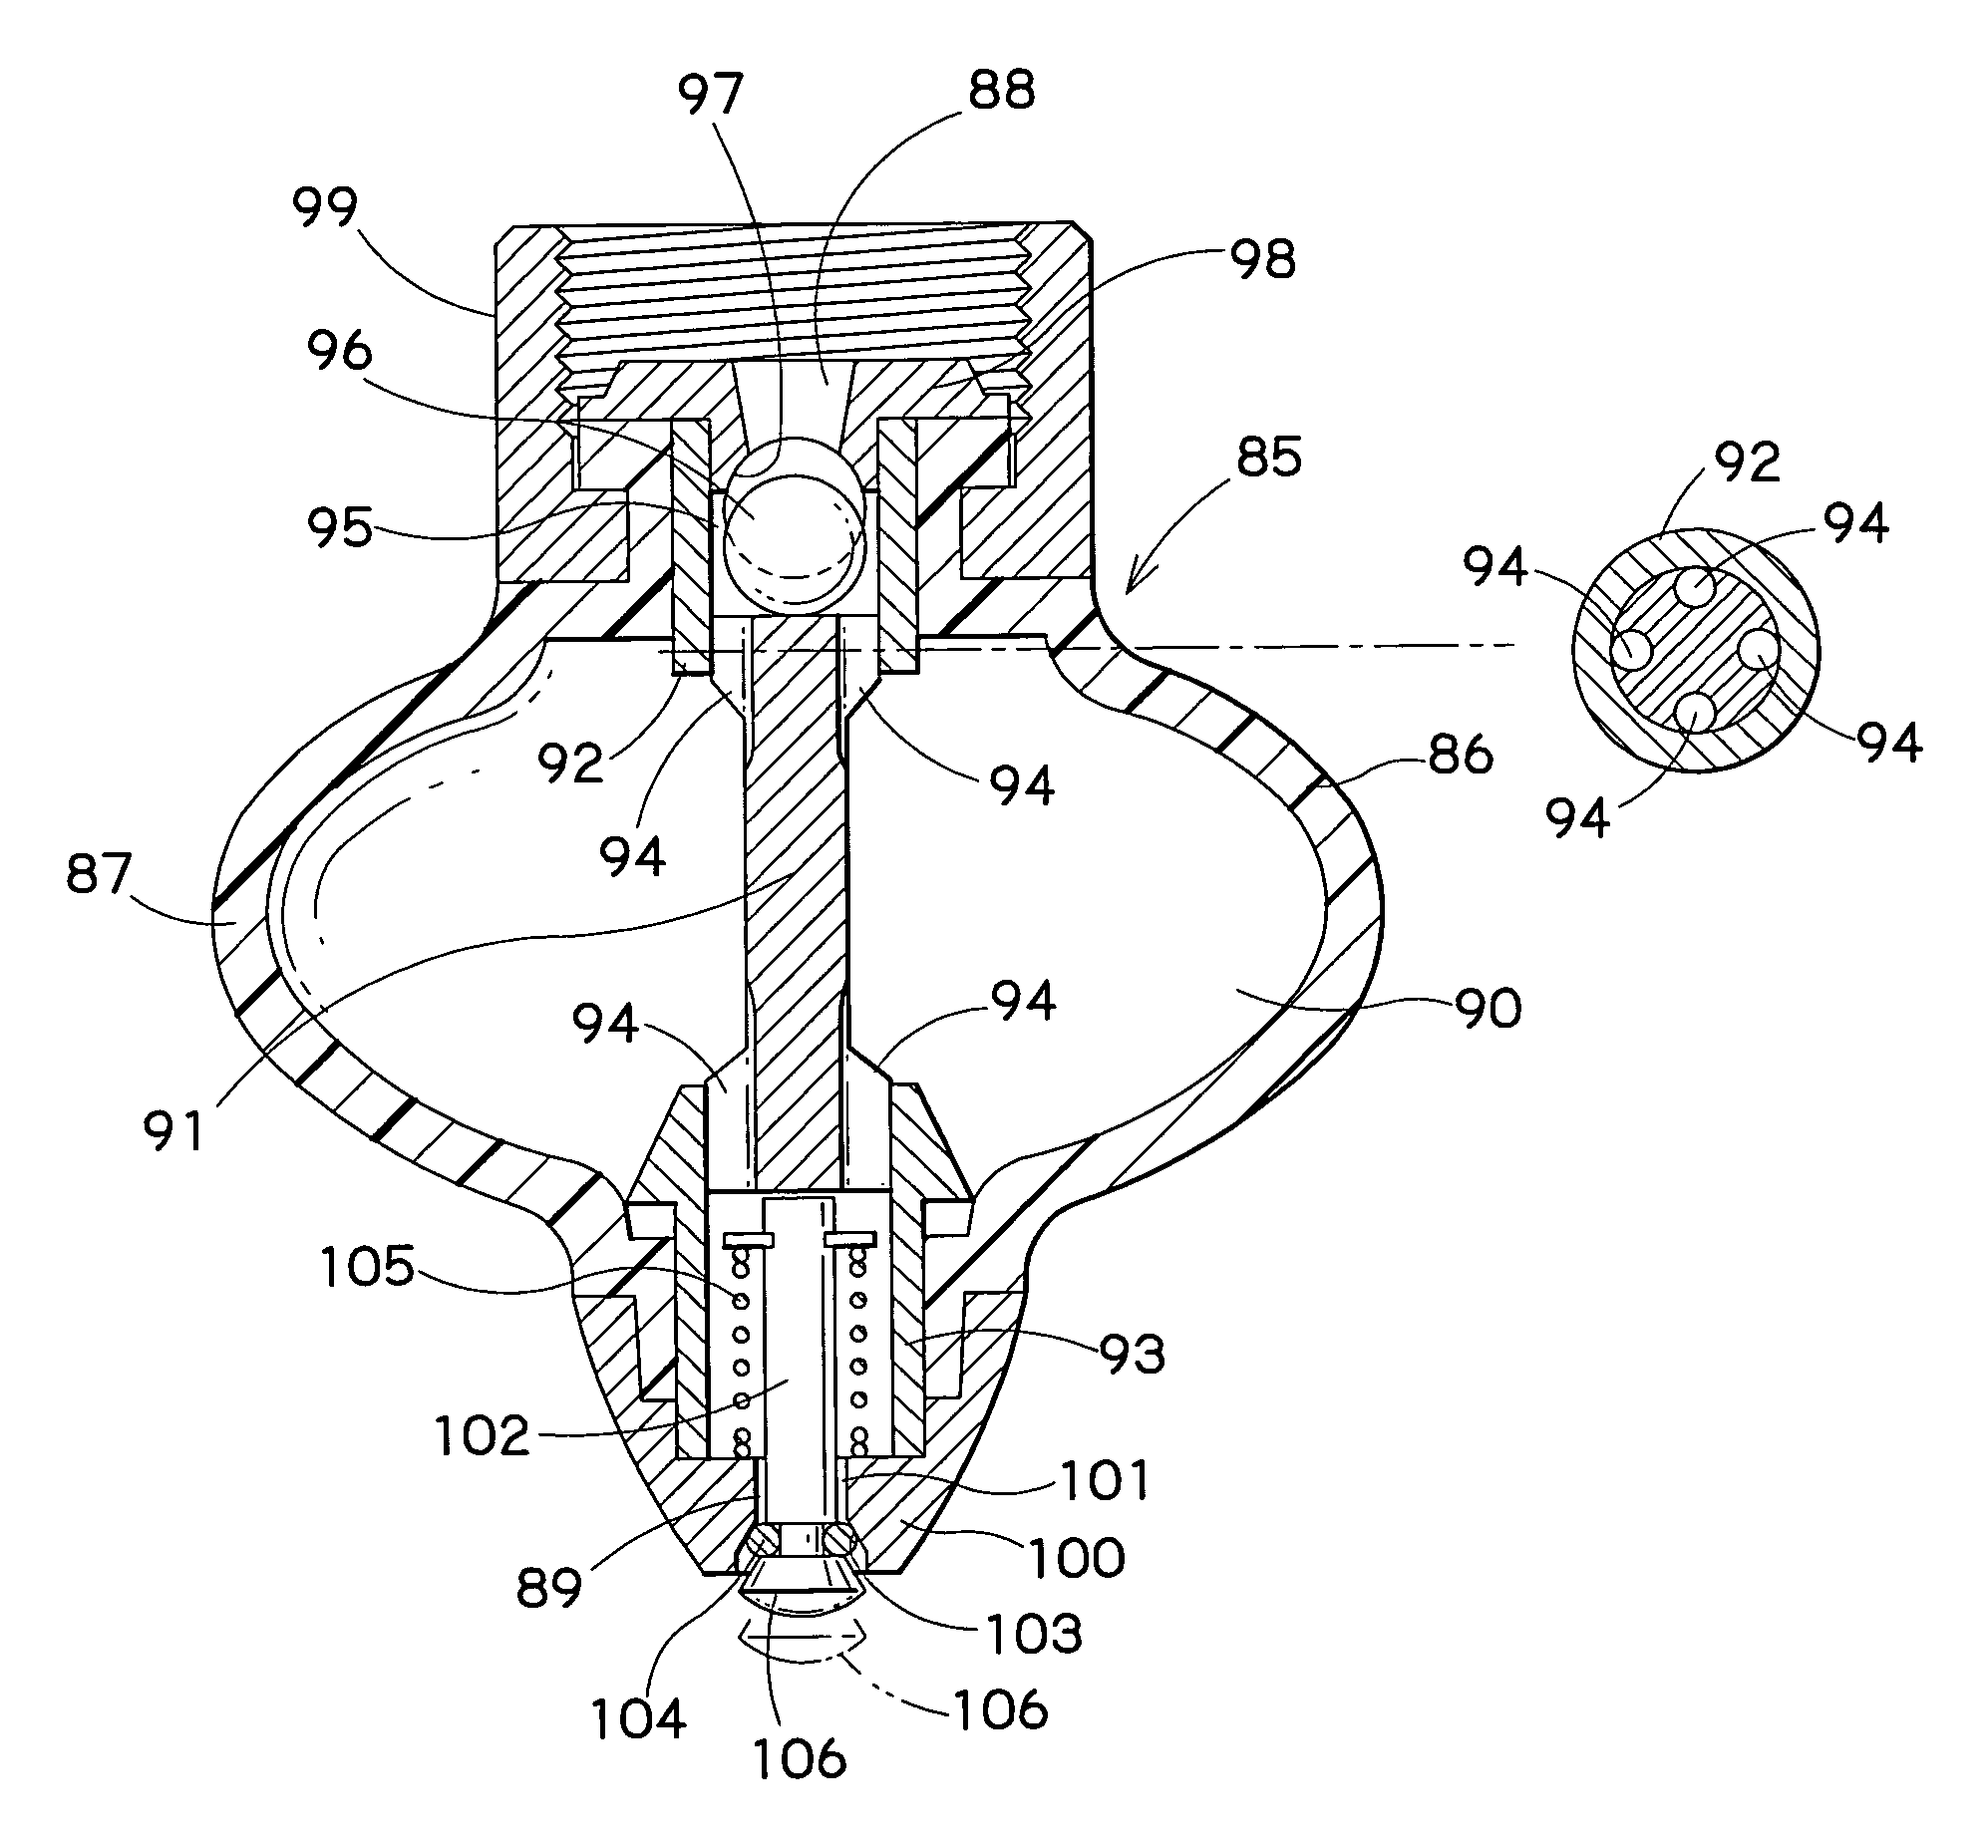 Apparatus for extracting the contents from a refill pouch